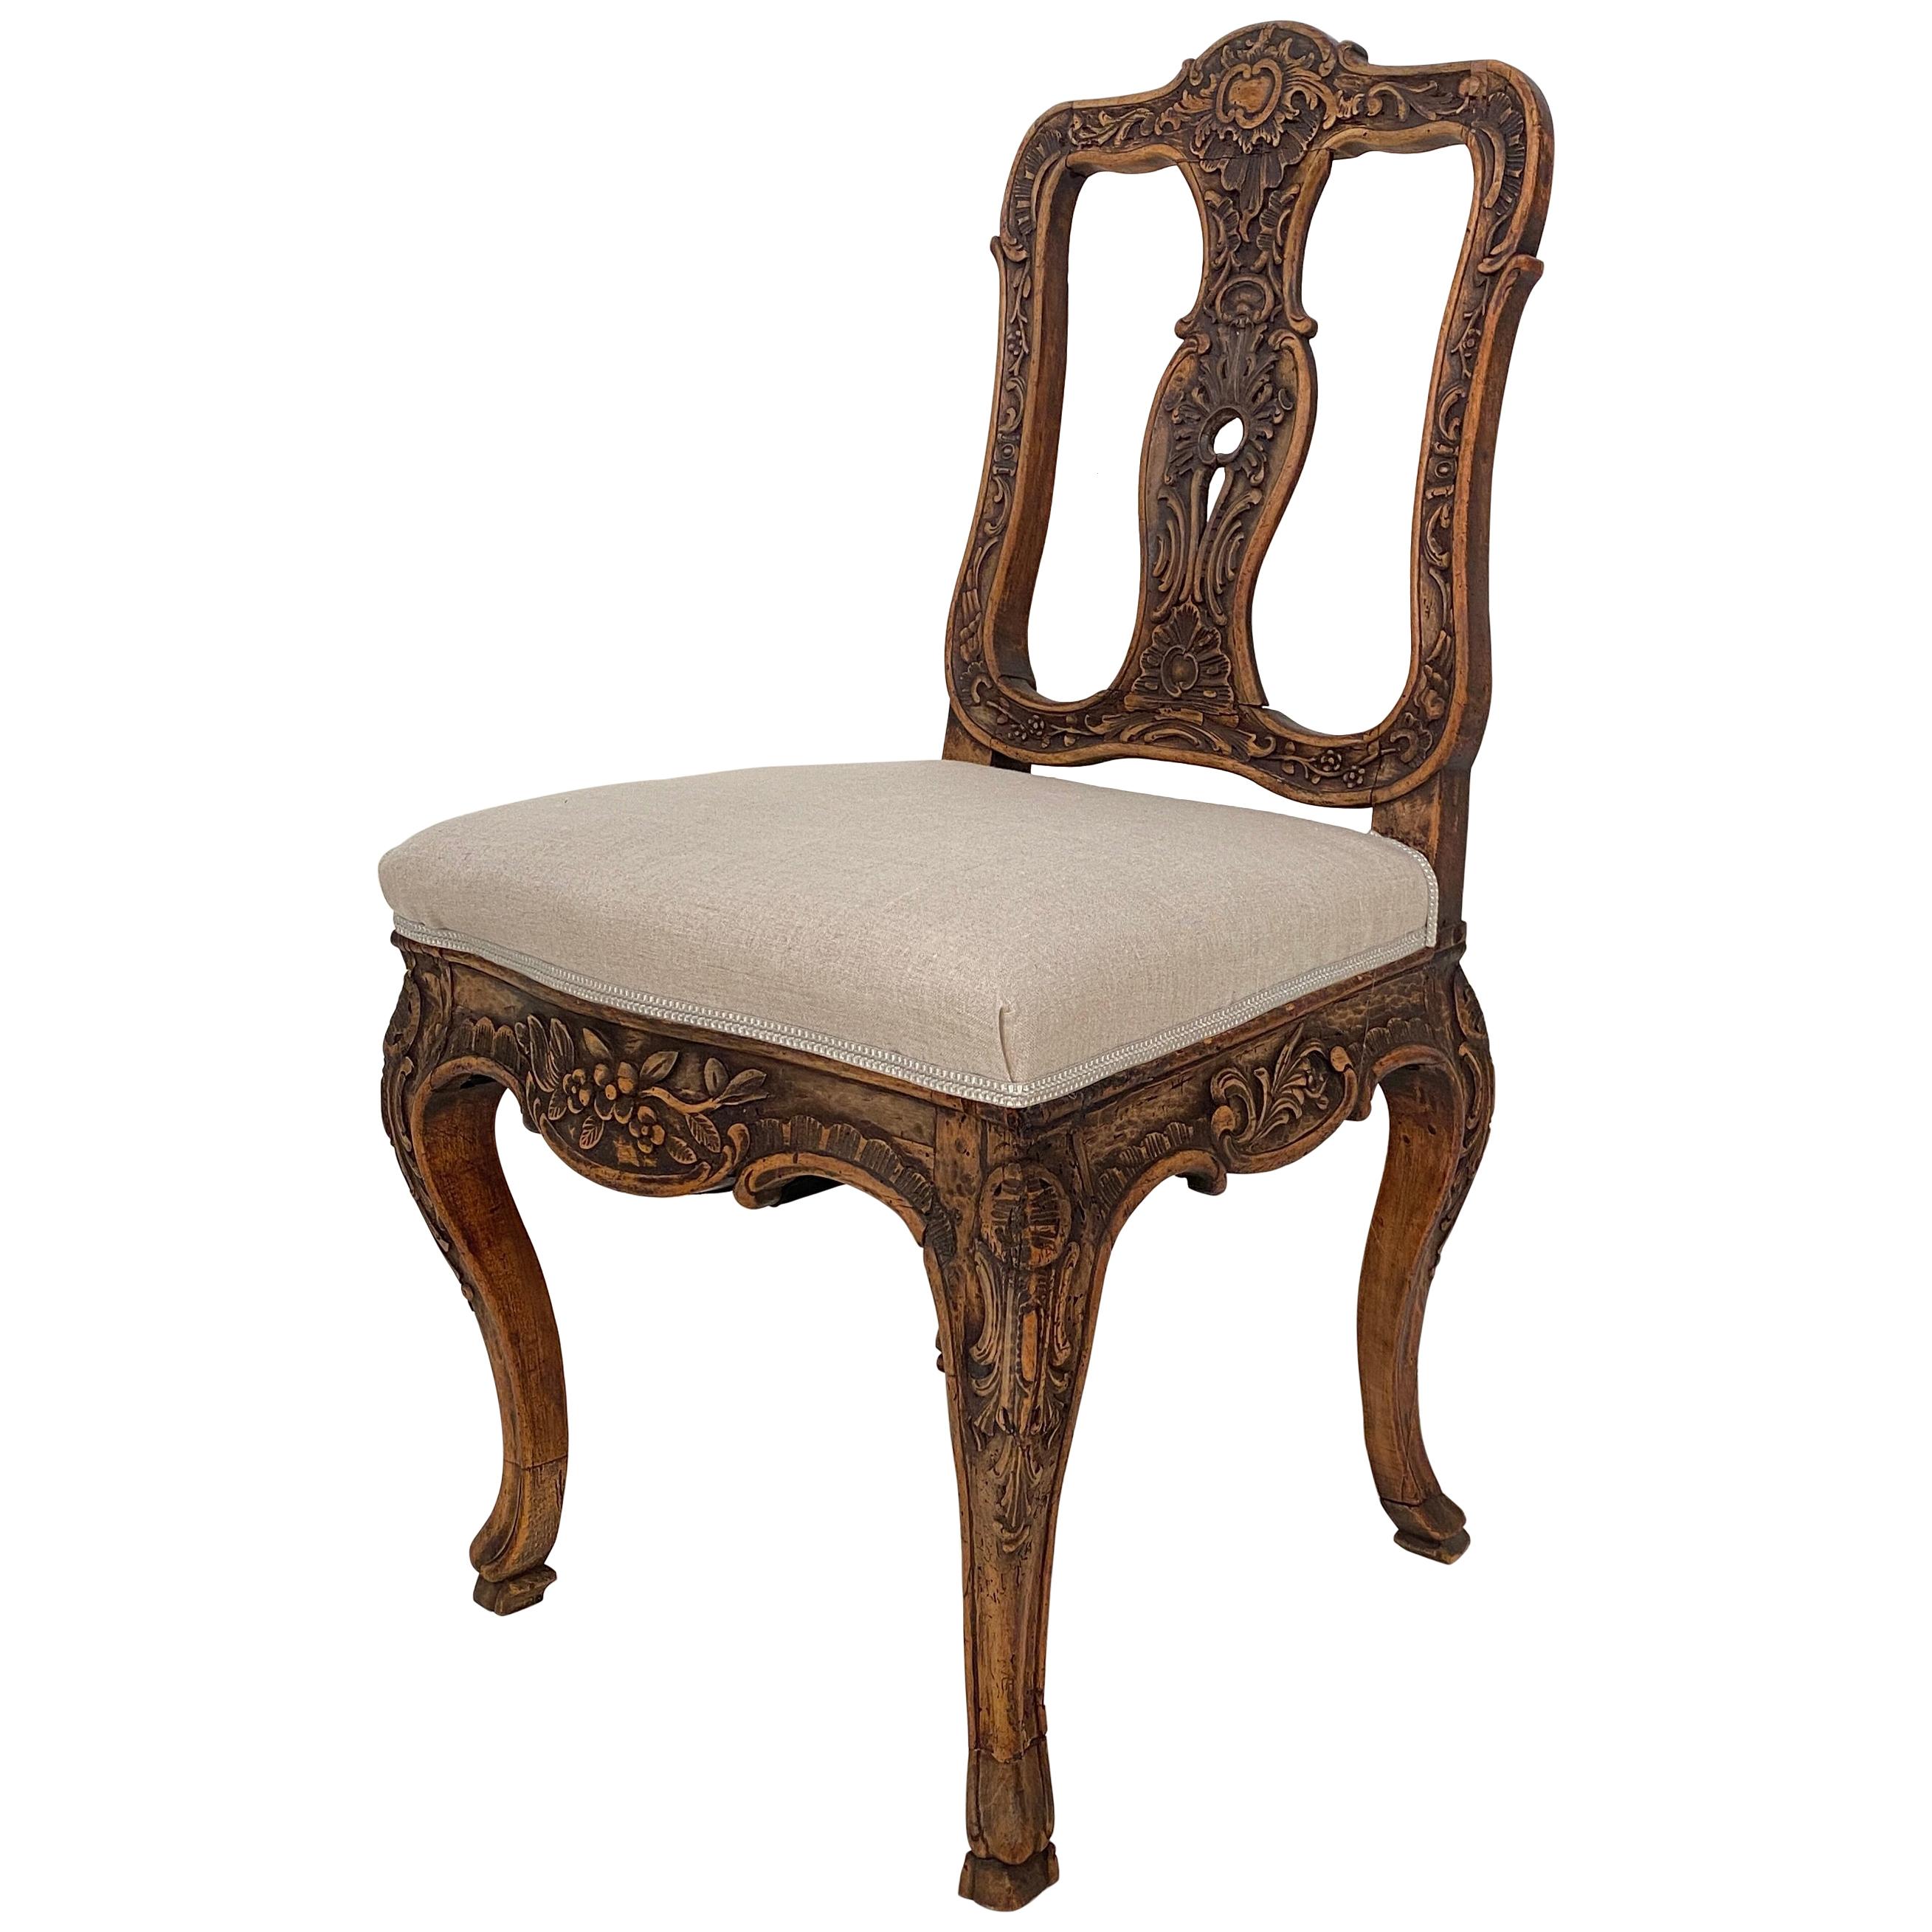 18th Century German Baroque Chair in Carved Walnut, circa 1740